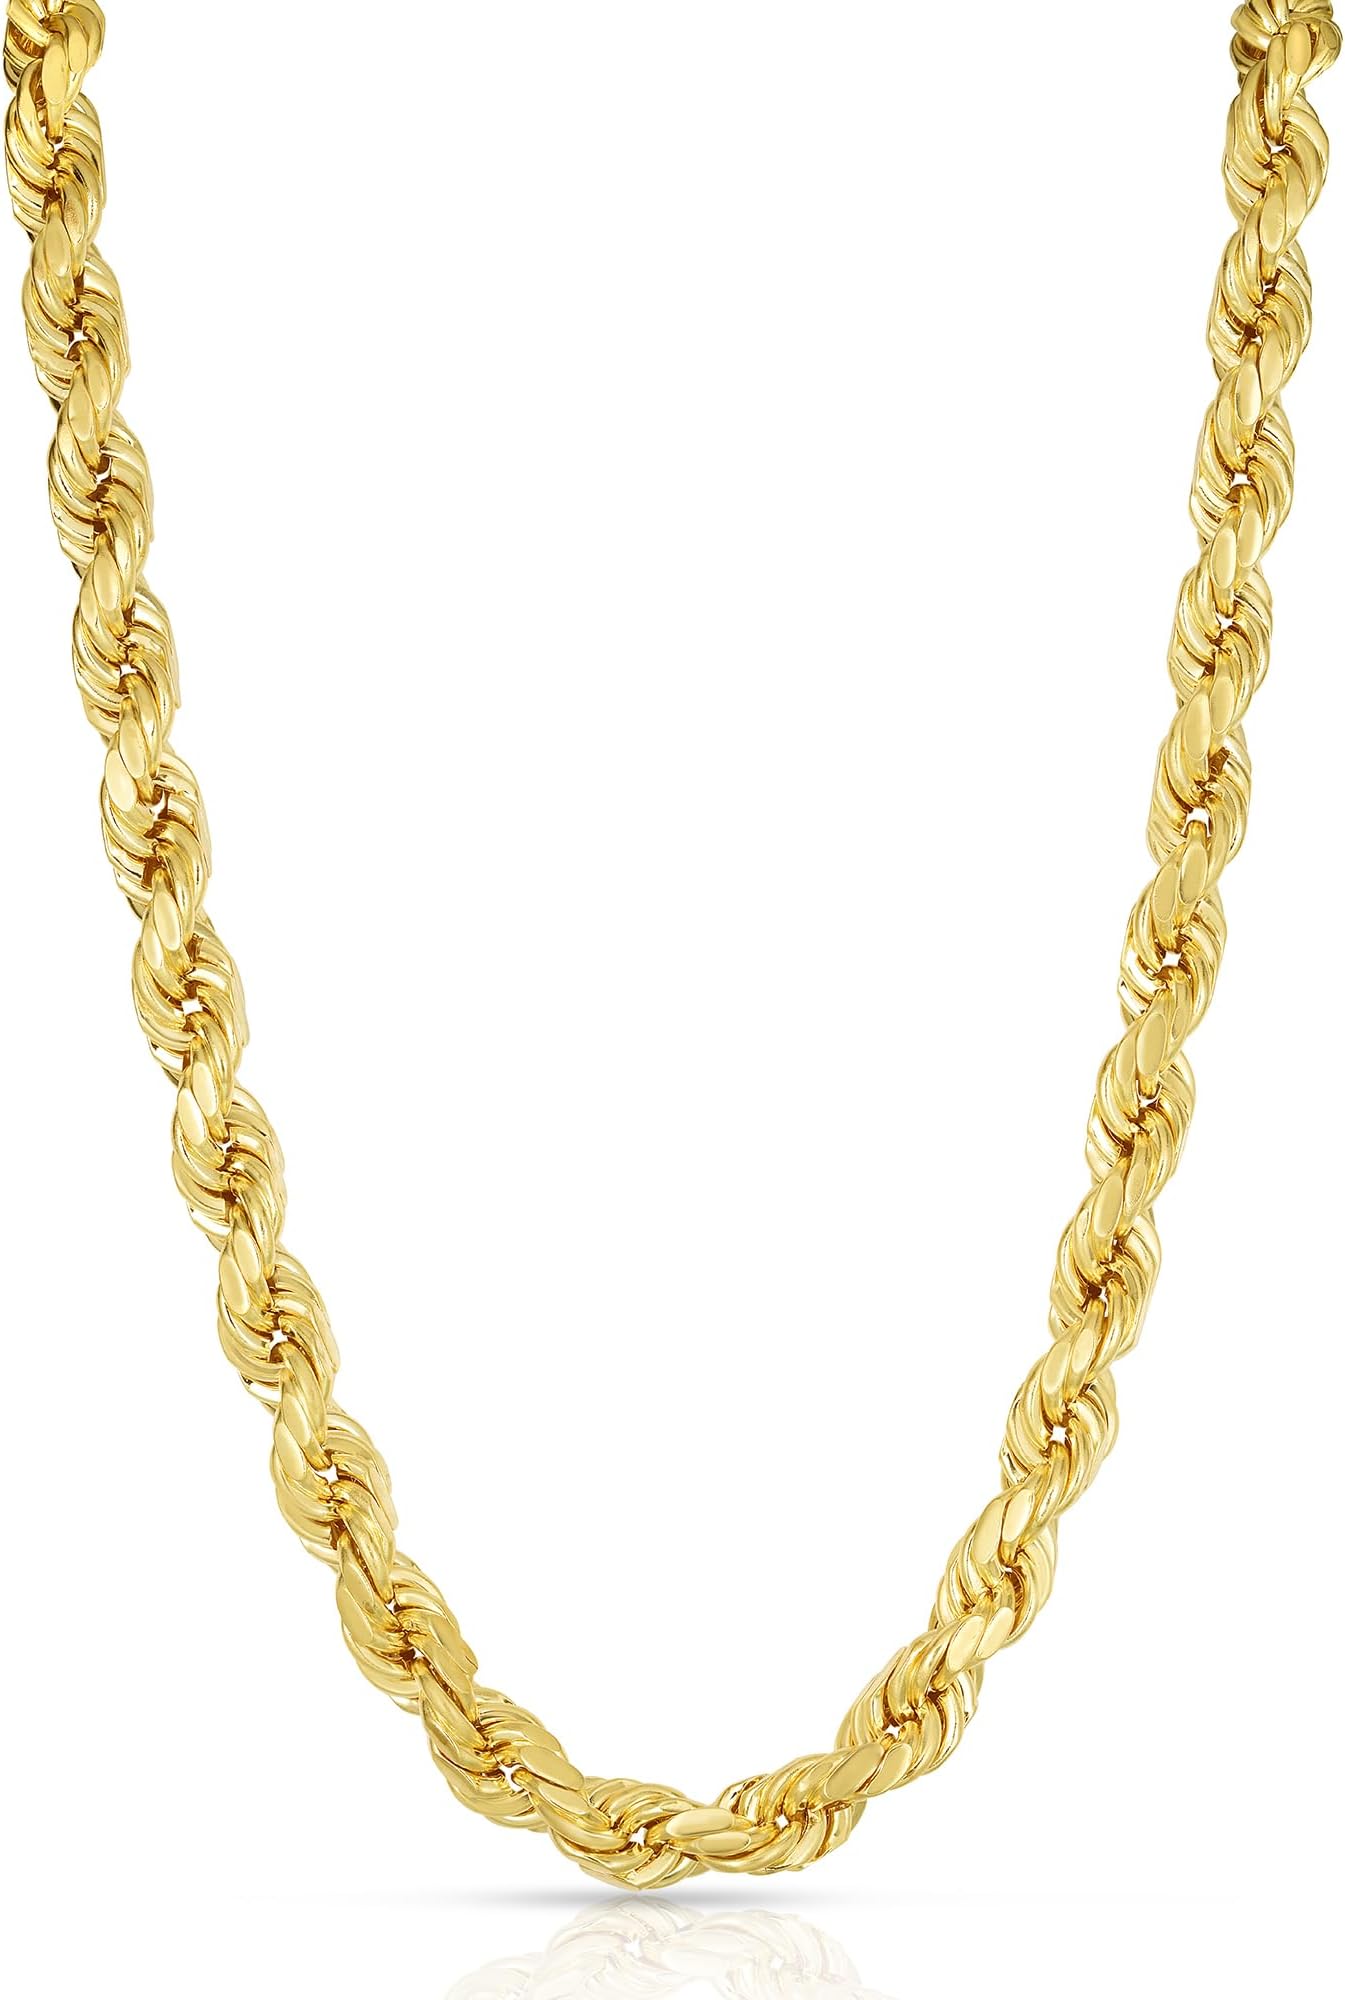 10k Yellow Gold 10mm Diamond Cut Hollow Rope Chain Necklace